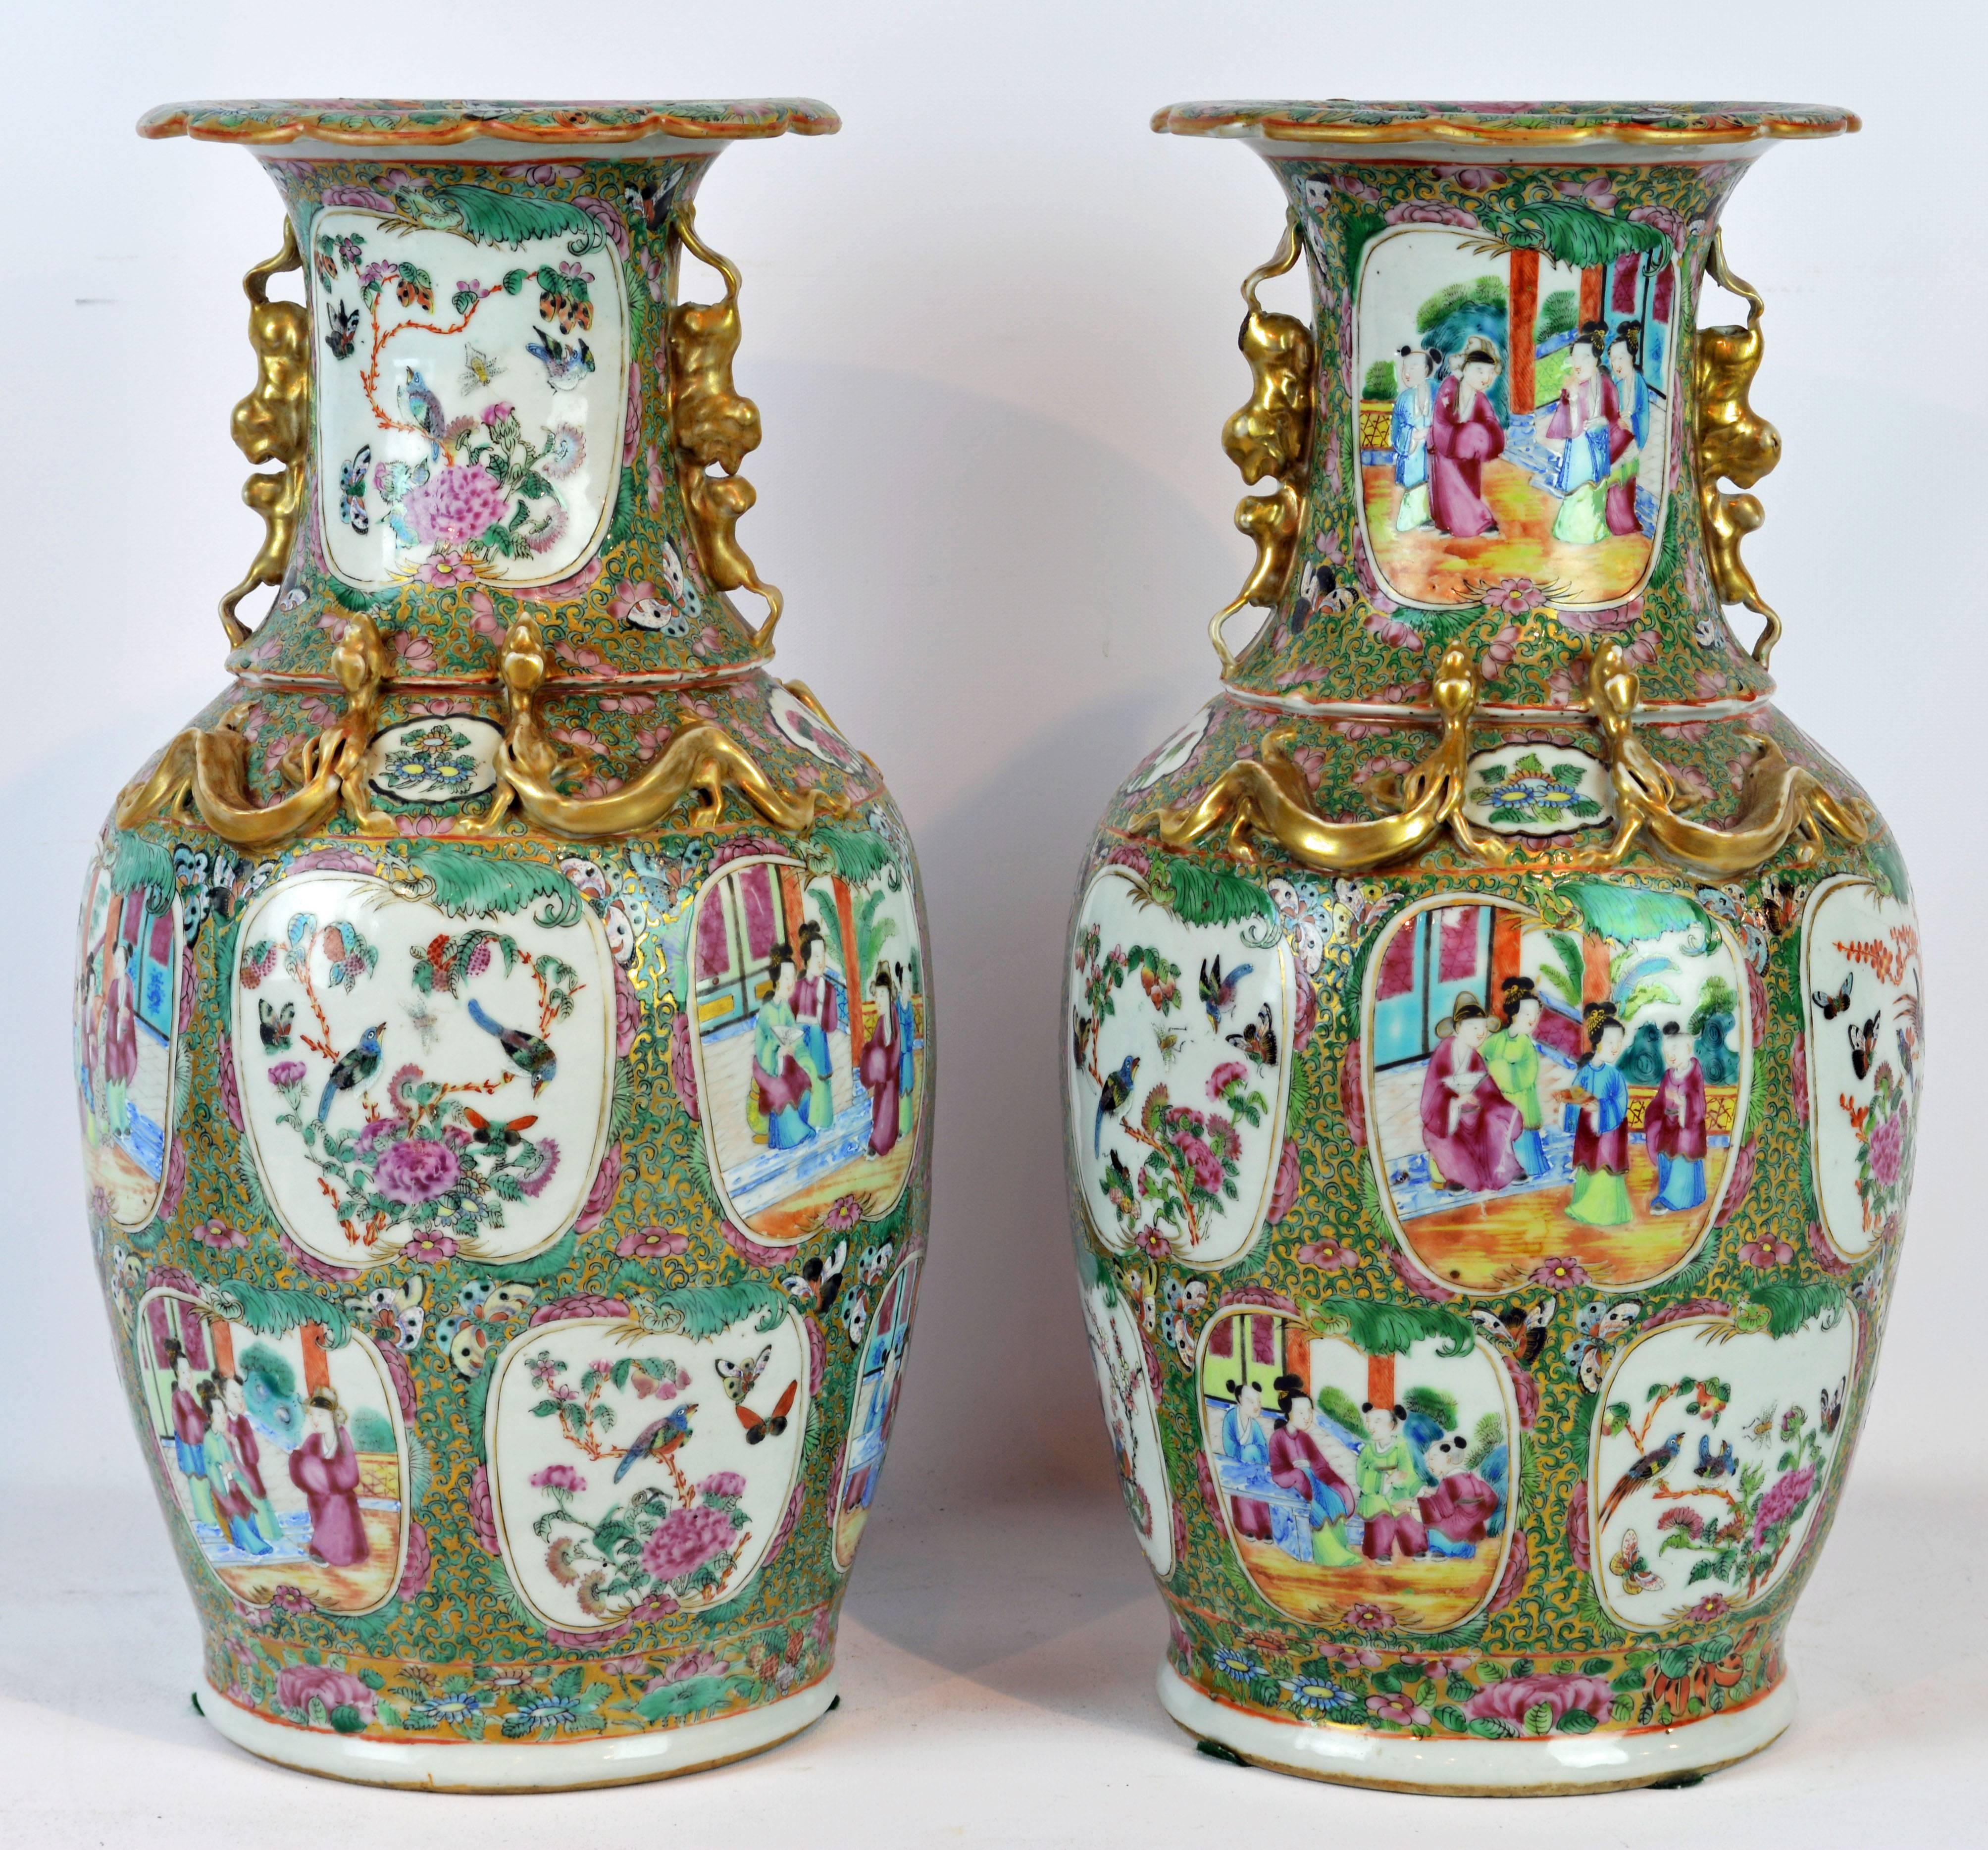 Chinese Export Pair of Lovely Chinese 19th Century Rose Medallion Vases with Gilt Lizards